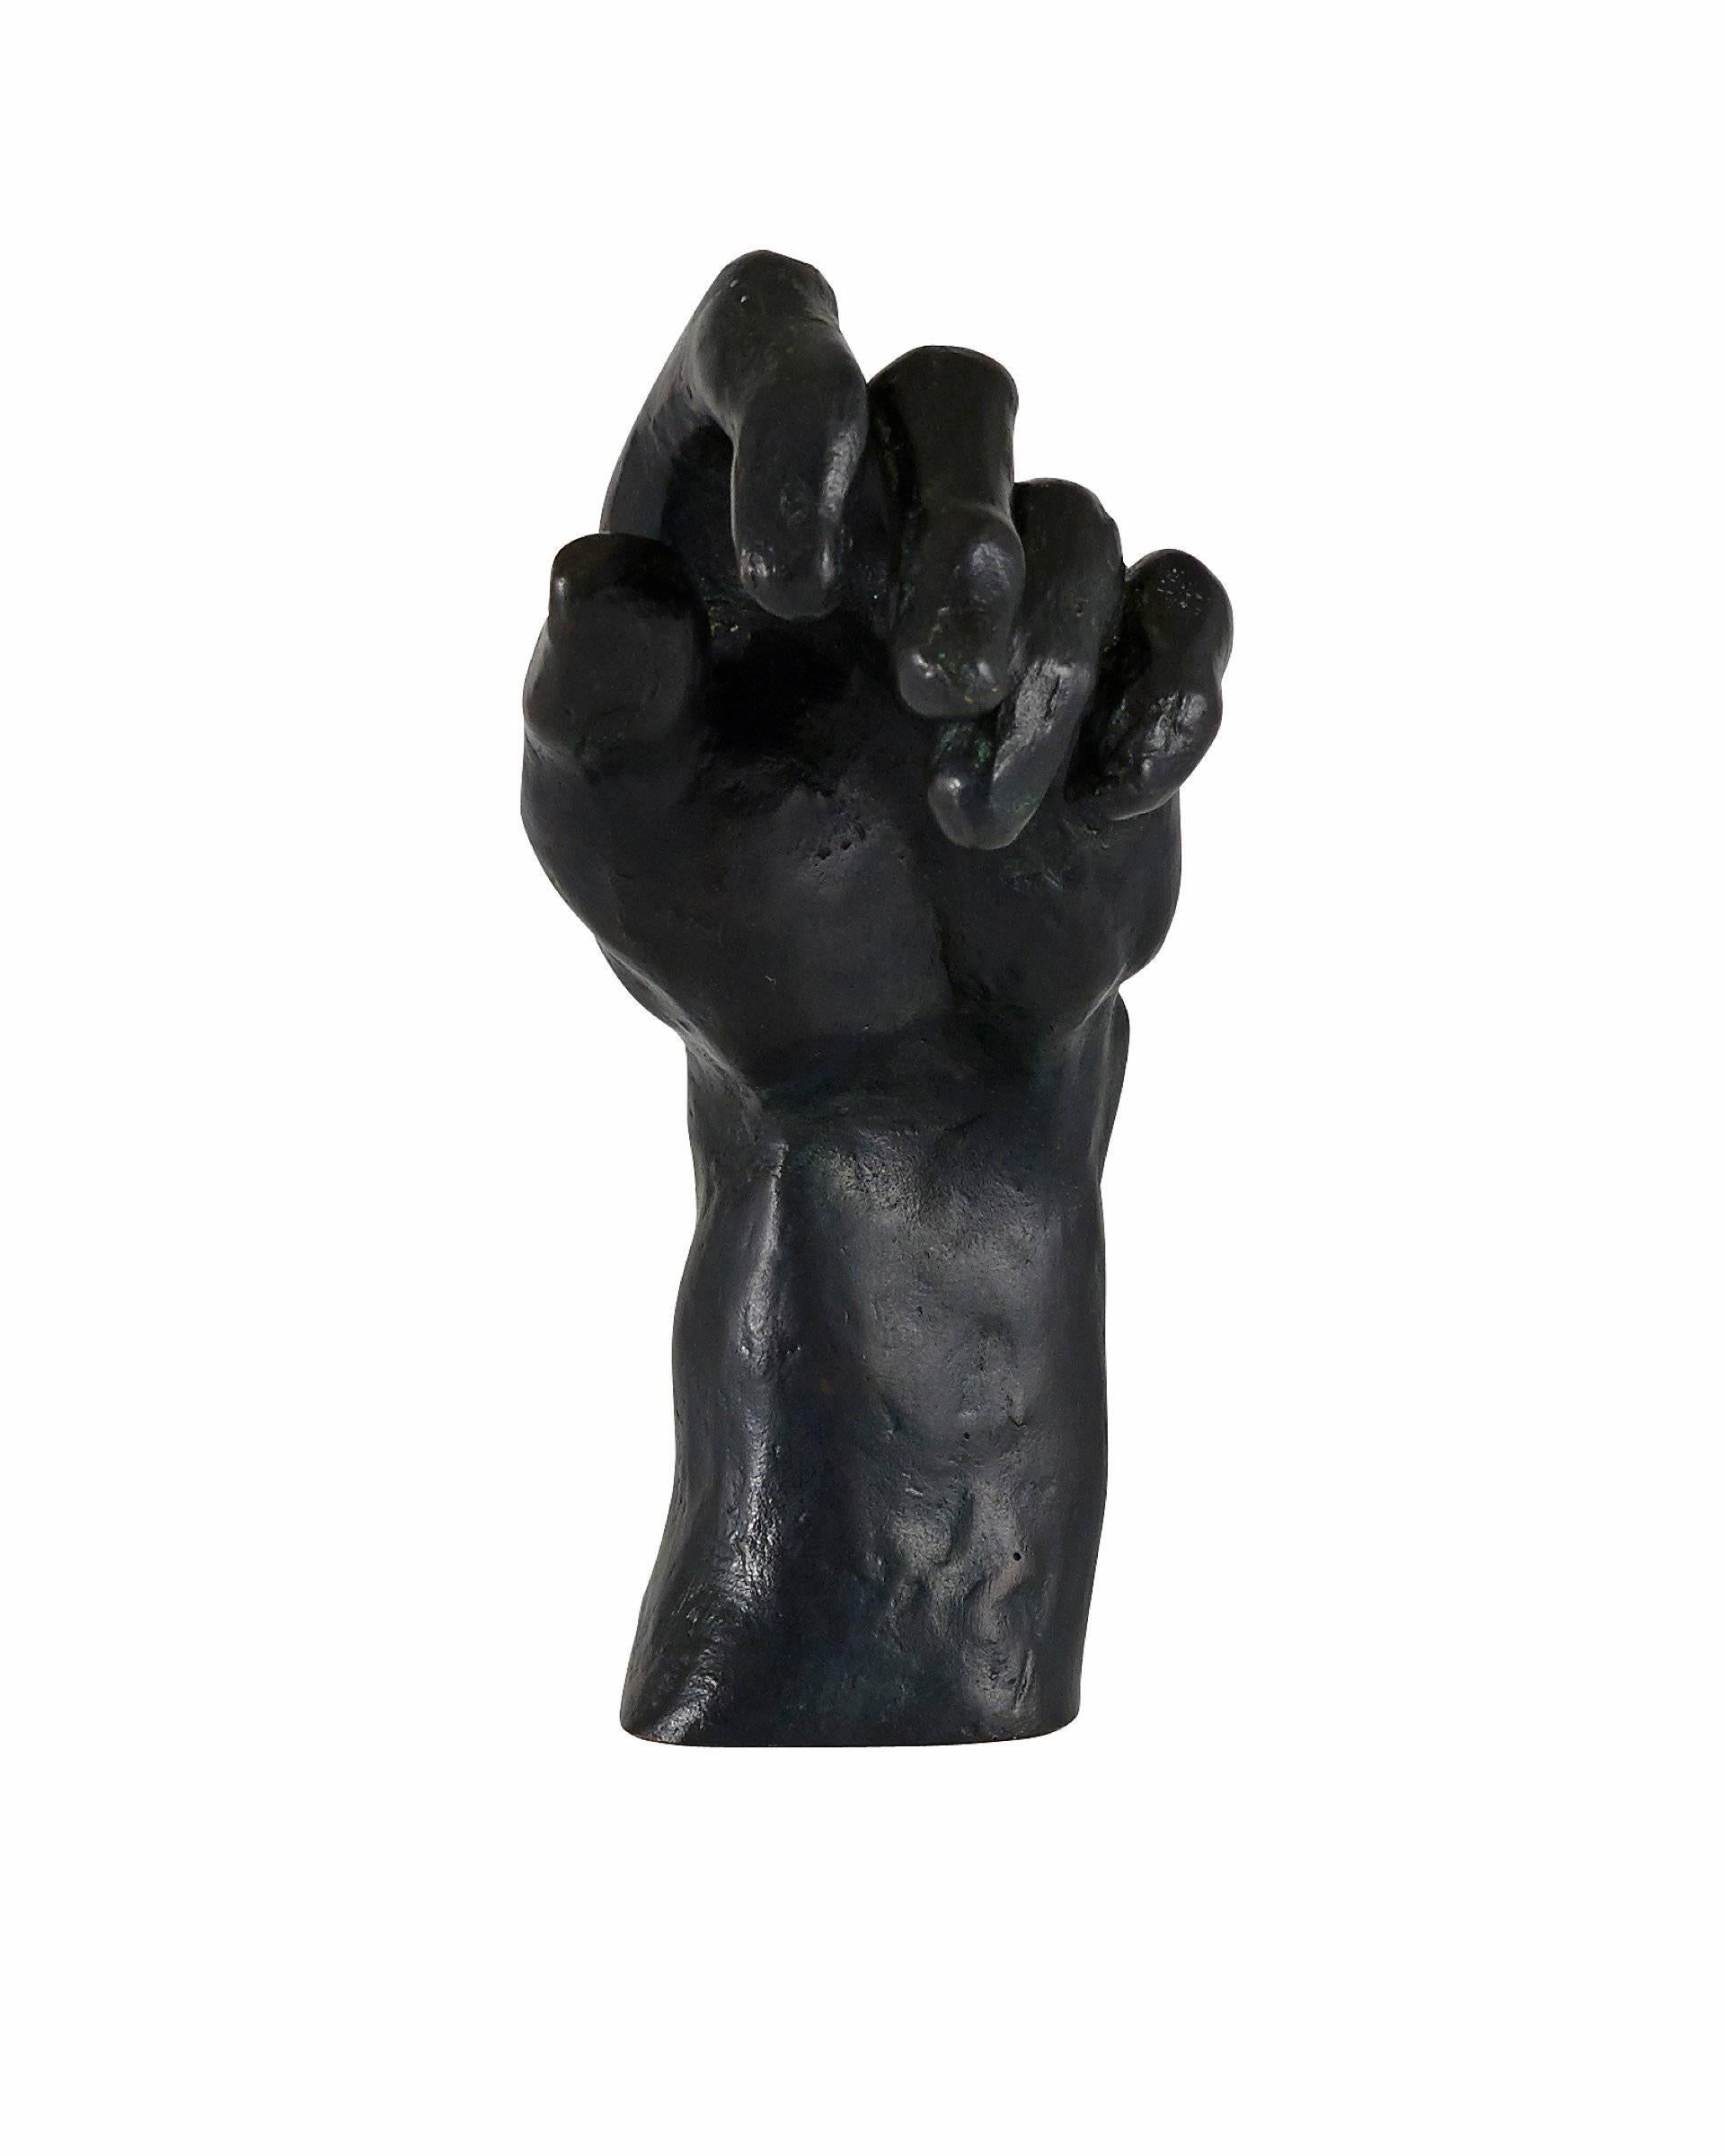 The Hand of the Thinker - Sculpture by Auguste Rodin